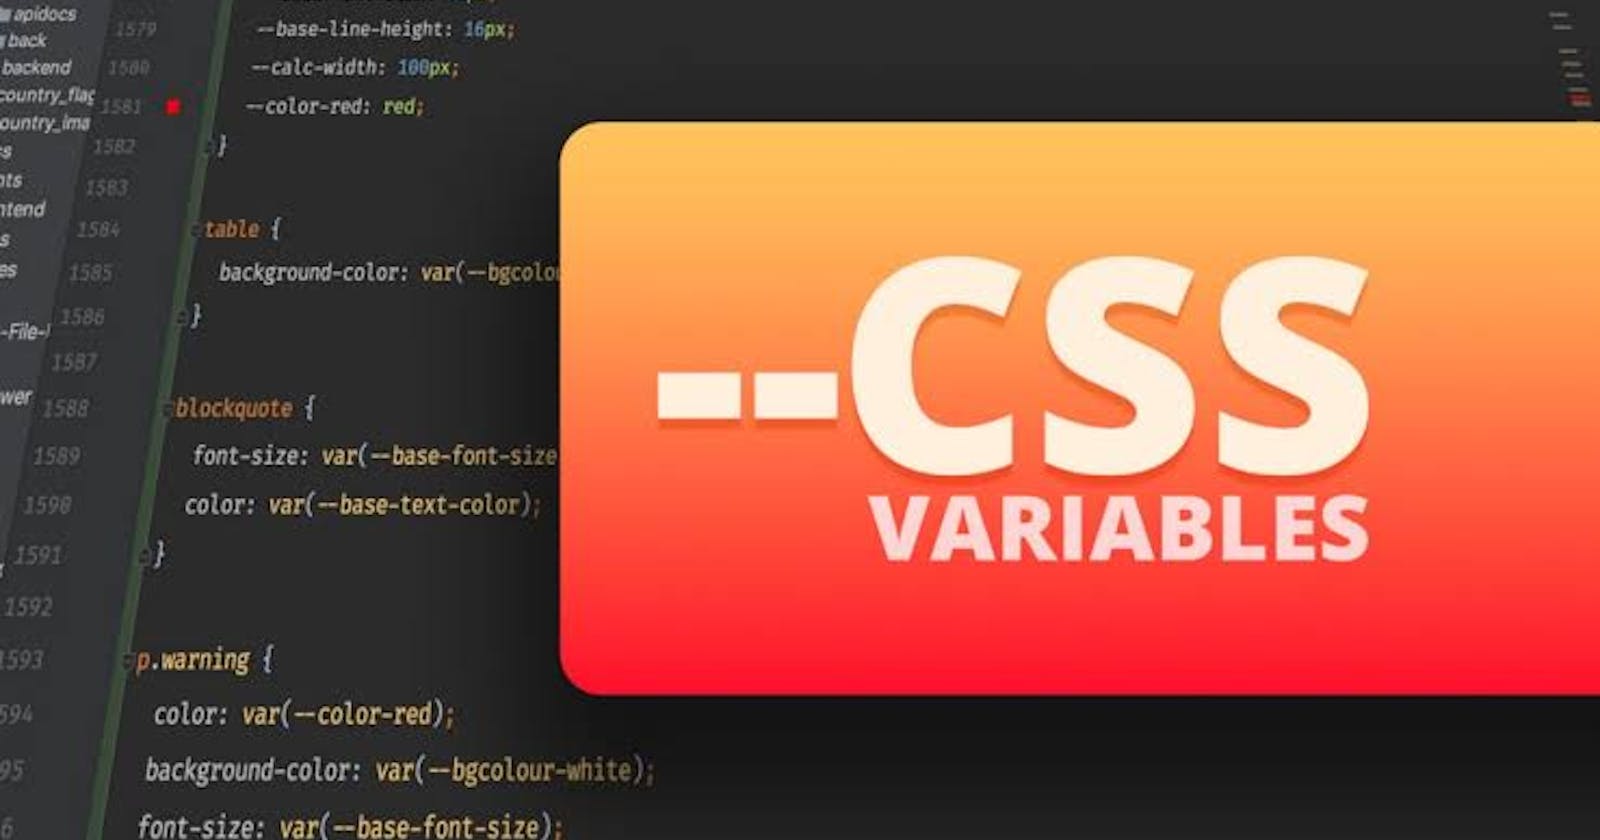 --css variables